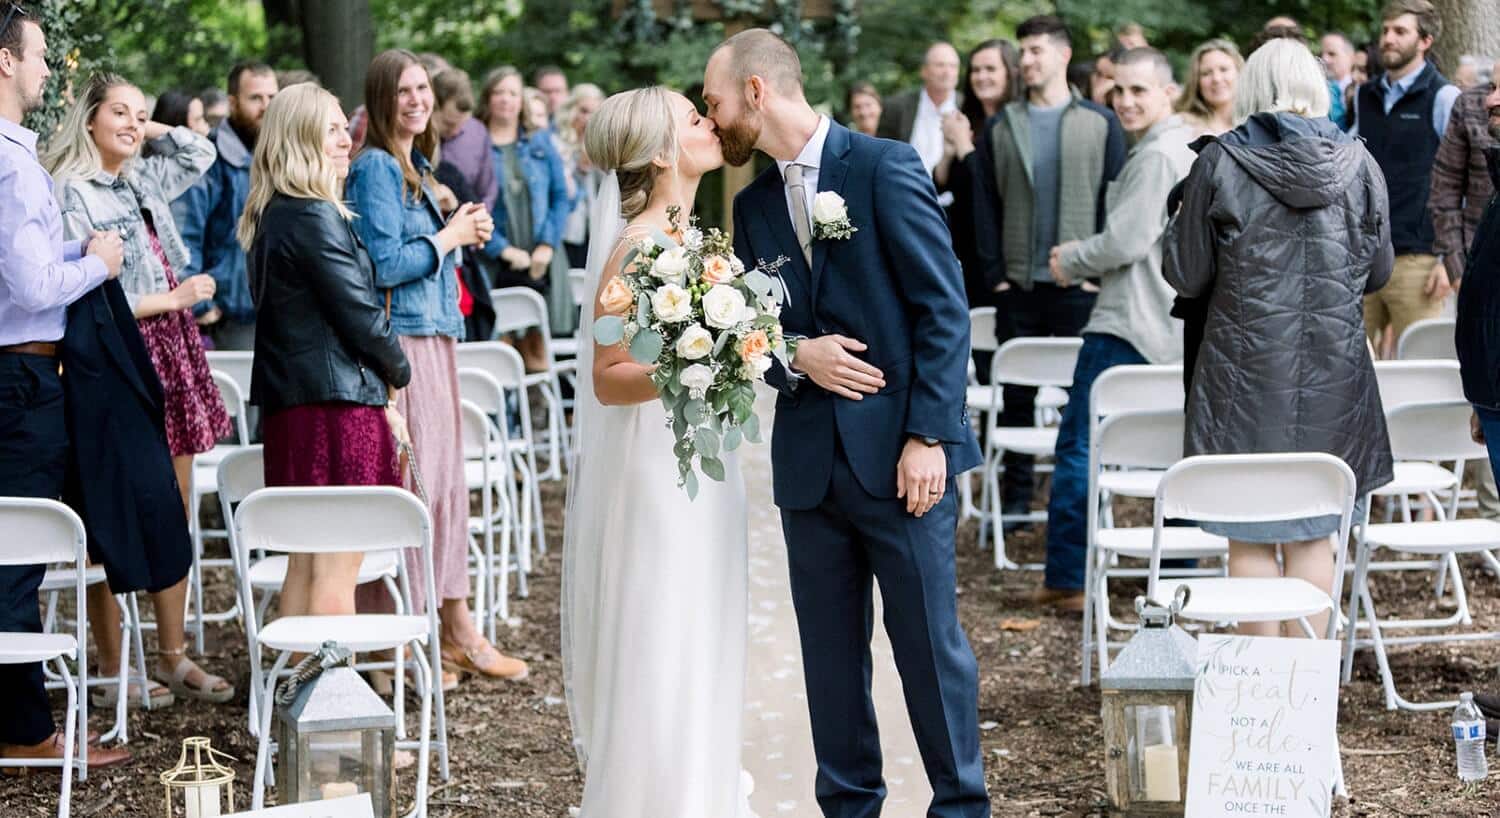 A bride and groom sharing a kiss at the end of the aisle with their guests smiling behind them